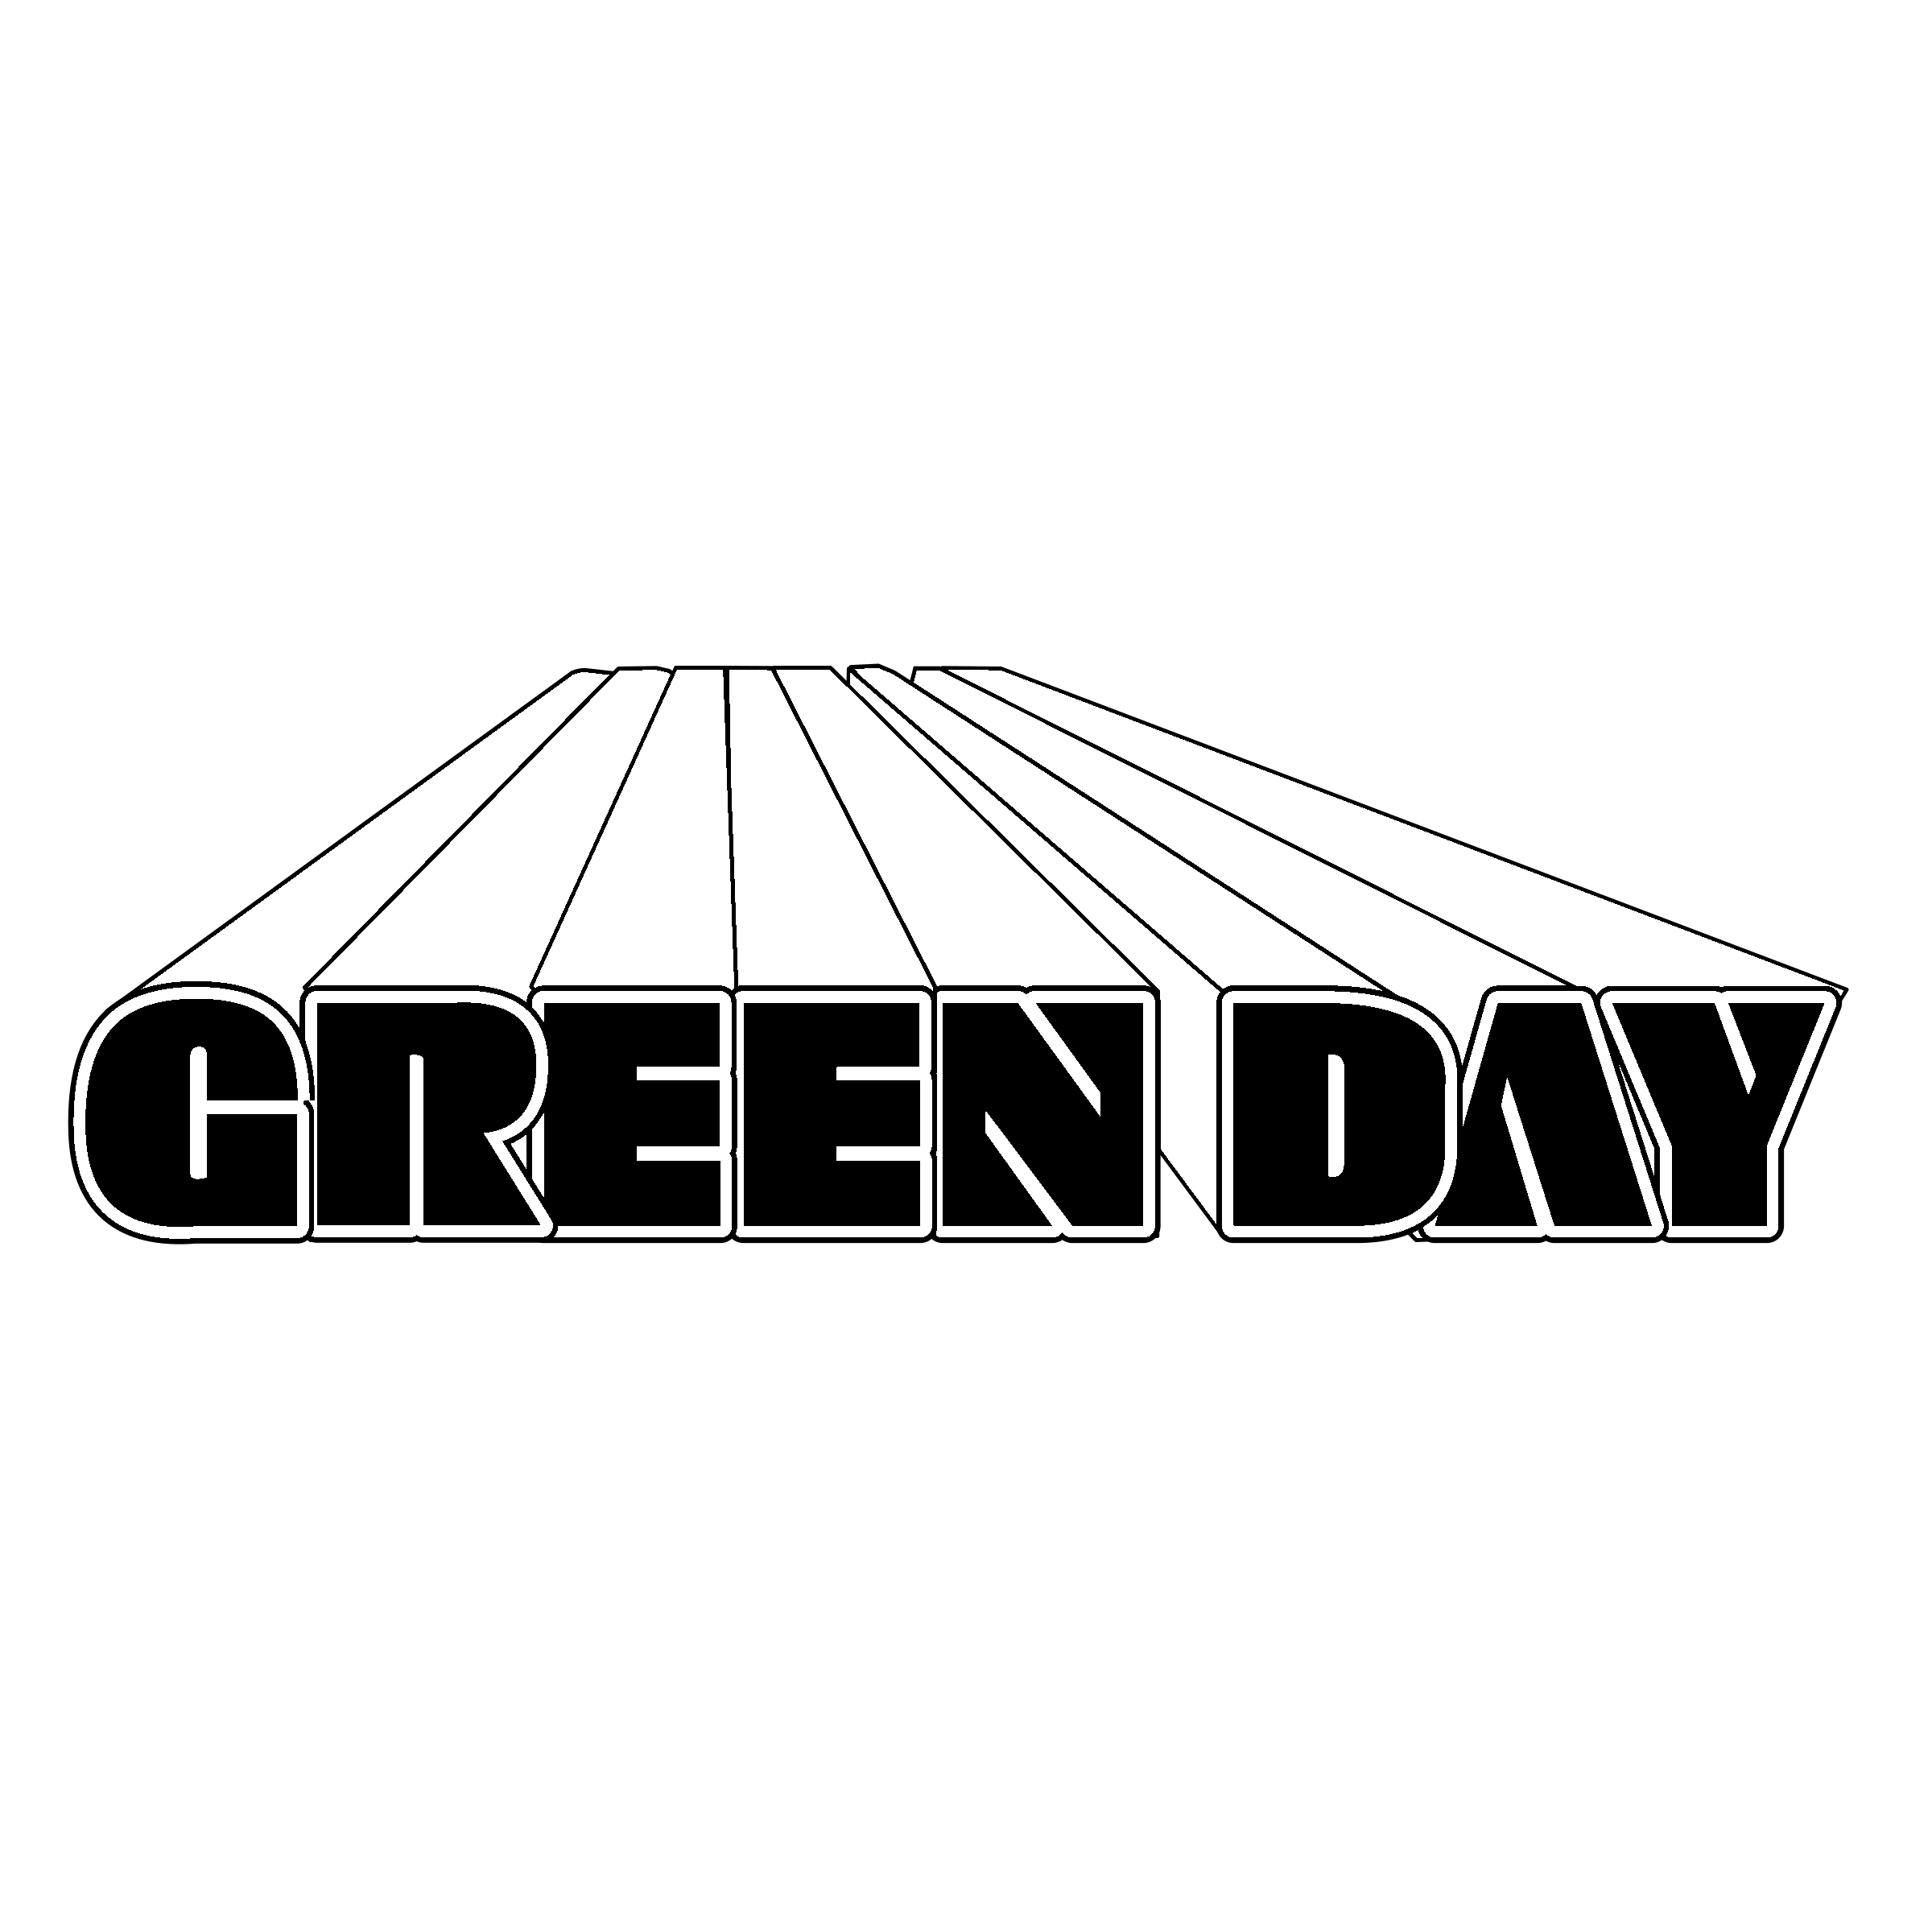 Green Day Black and White Logo - Green Day Logo PNG Transparent & SVG Vector - Freebie Supply